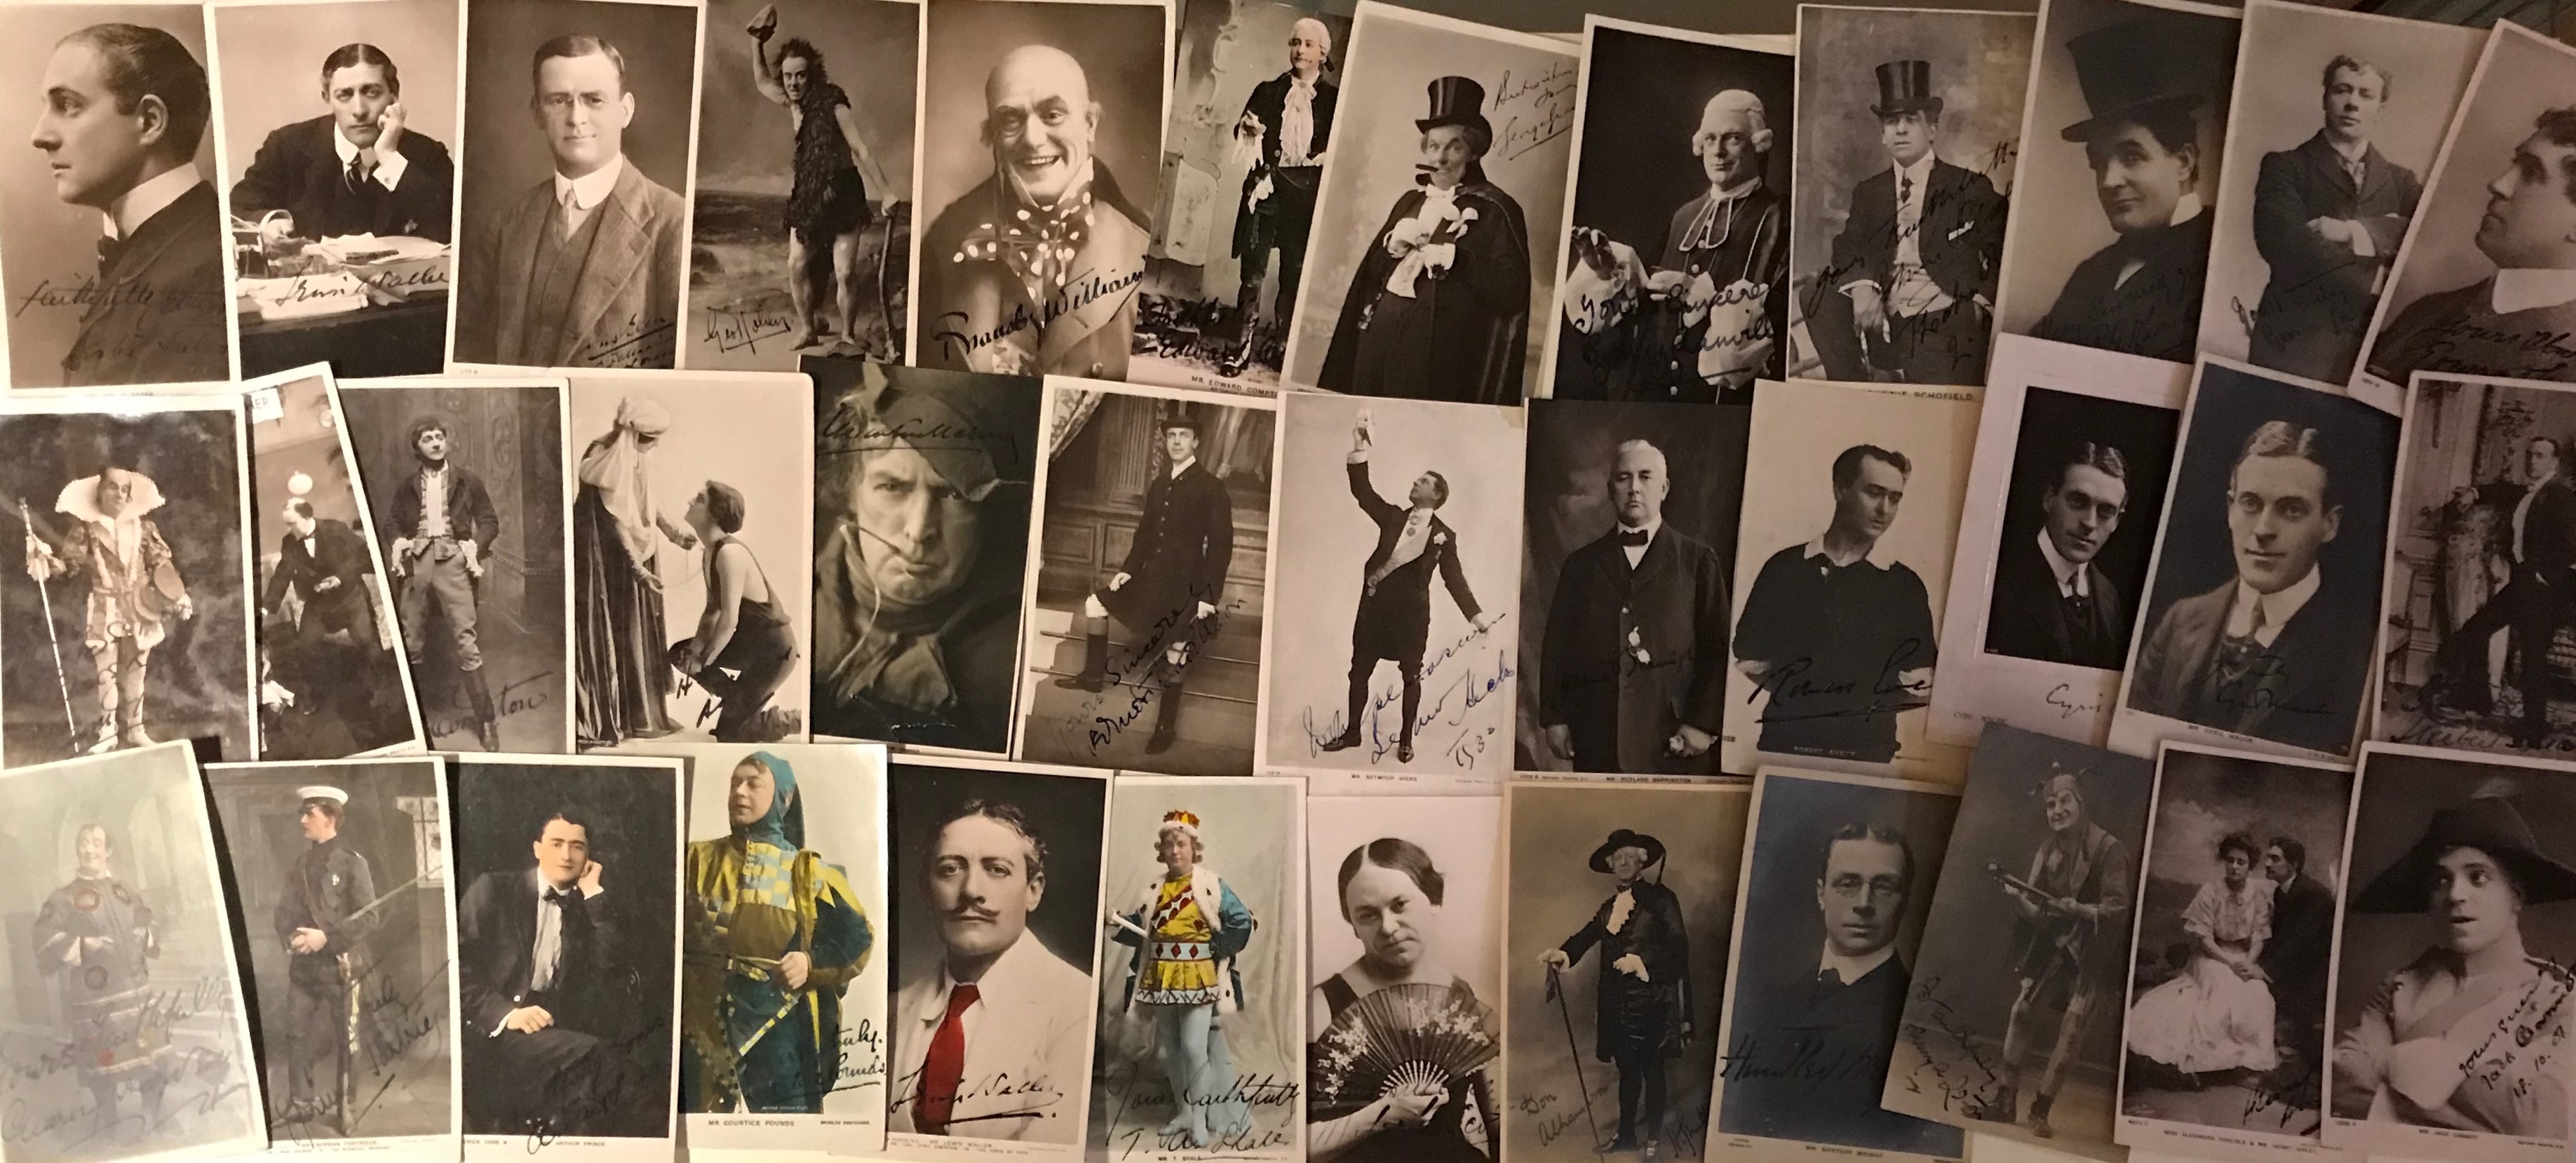 THEATRE: Selection of vintage signed postcard photographs by various Edwardian stage actors, - Image 12 of 12